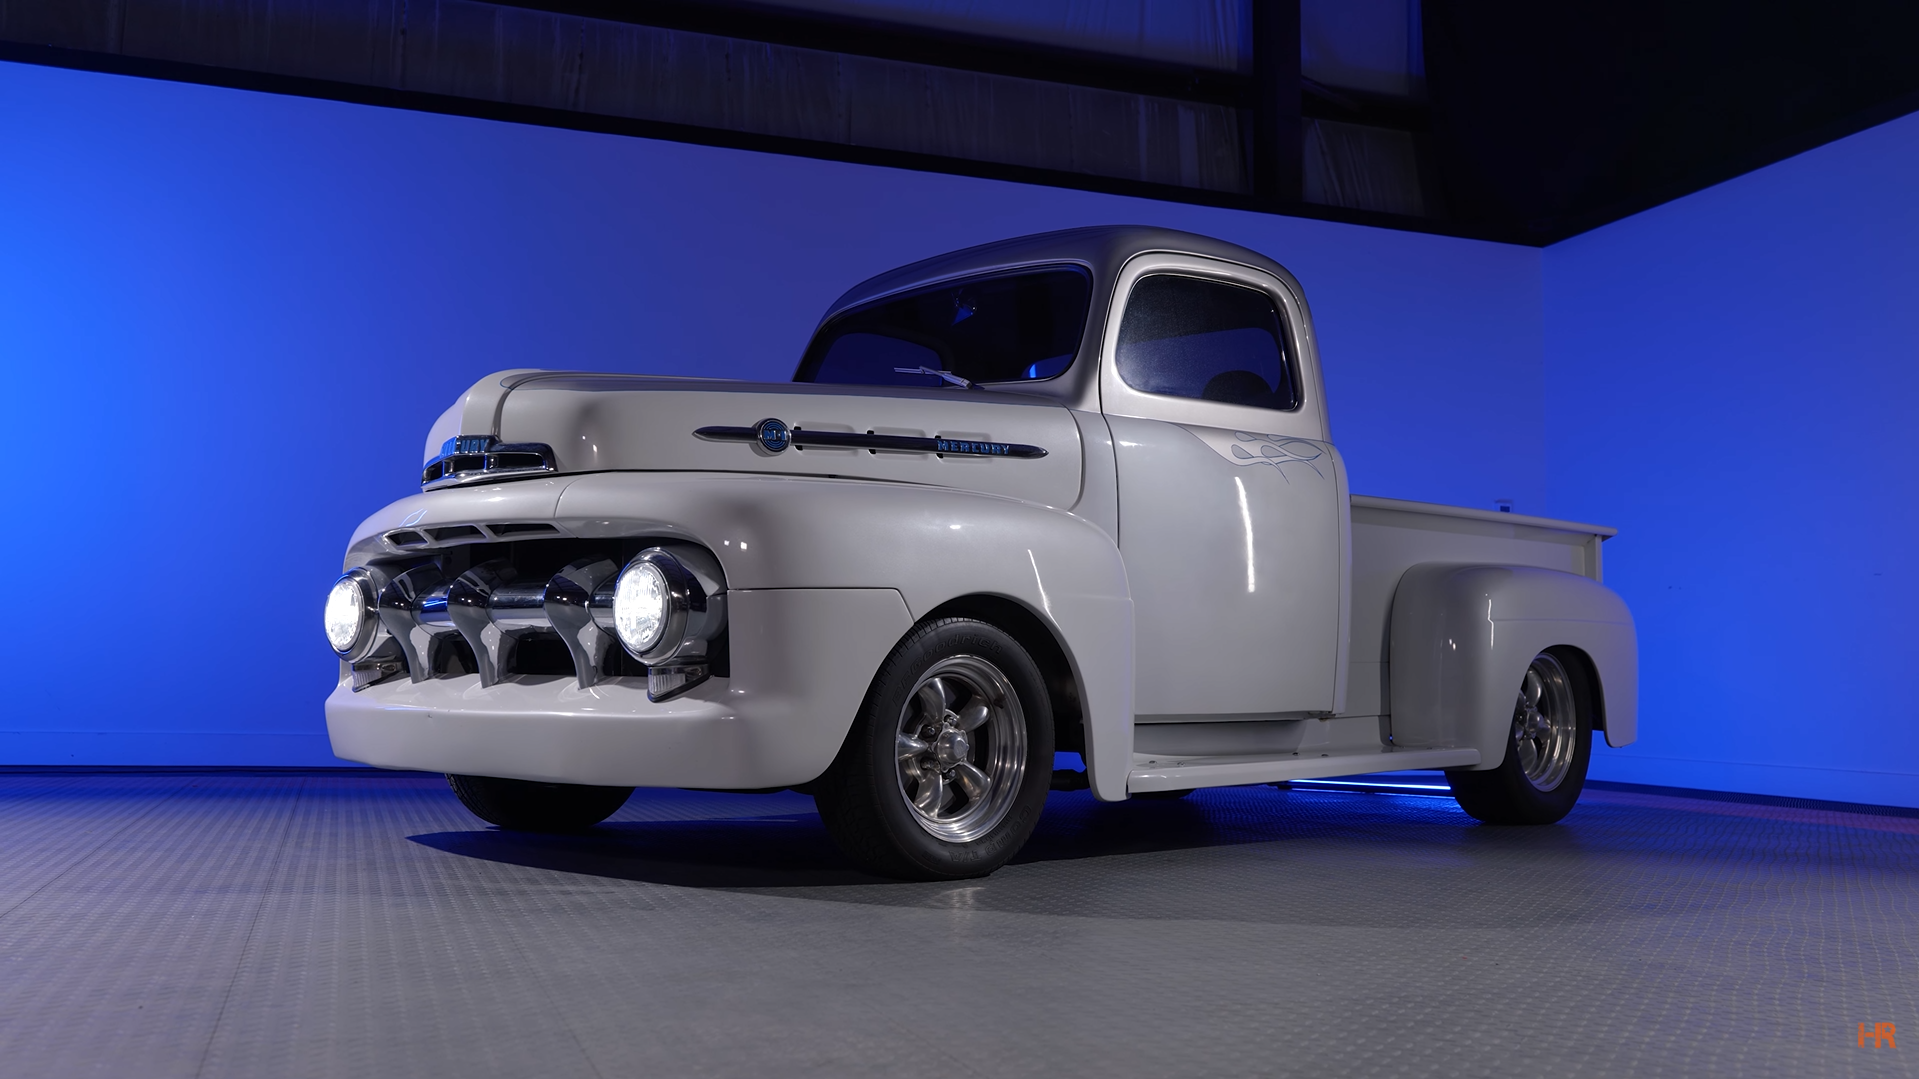 An old Chevrolet pickup truck with Holley RetroBright Headlights.